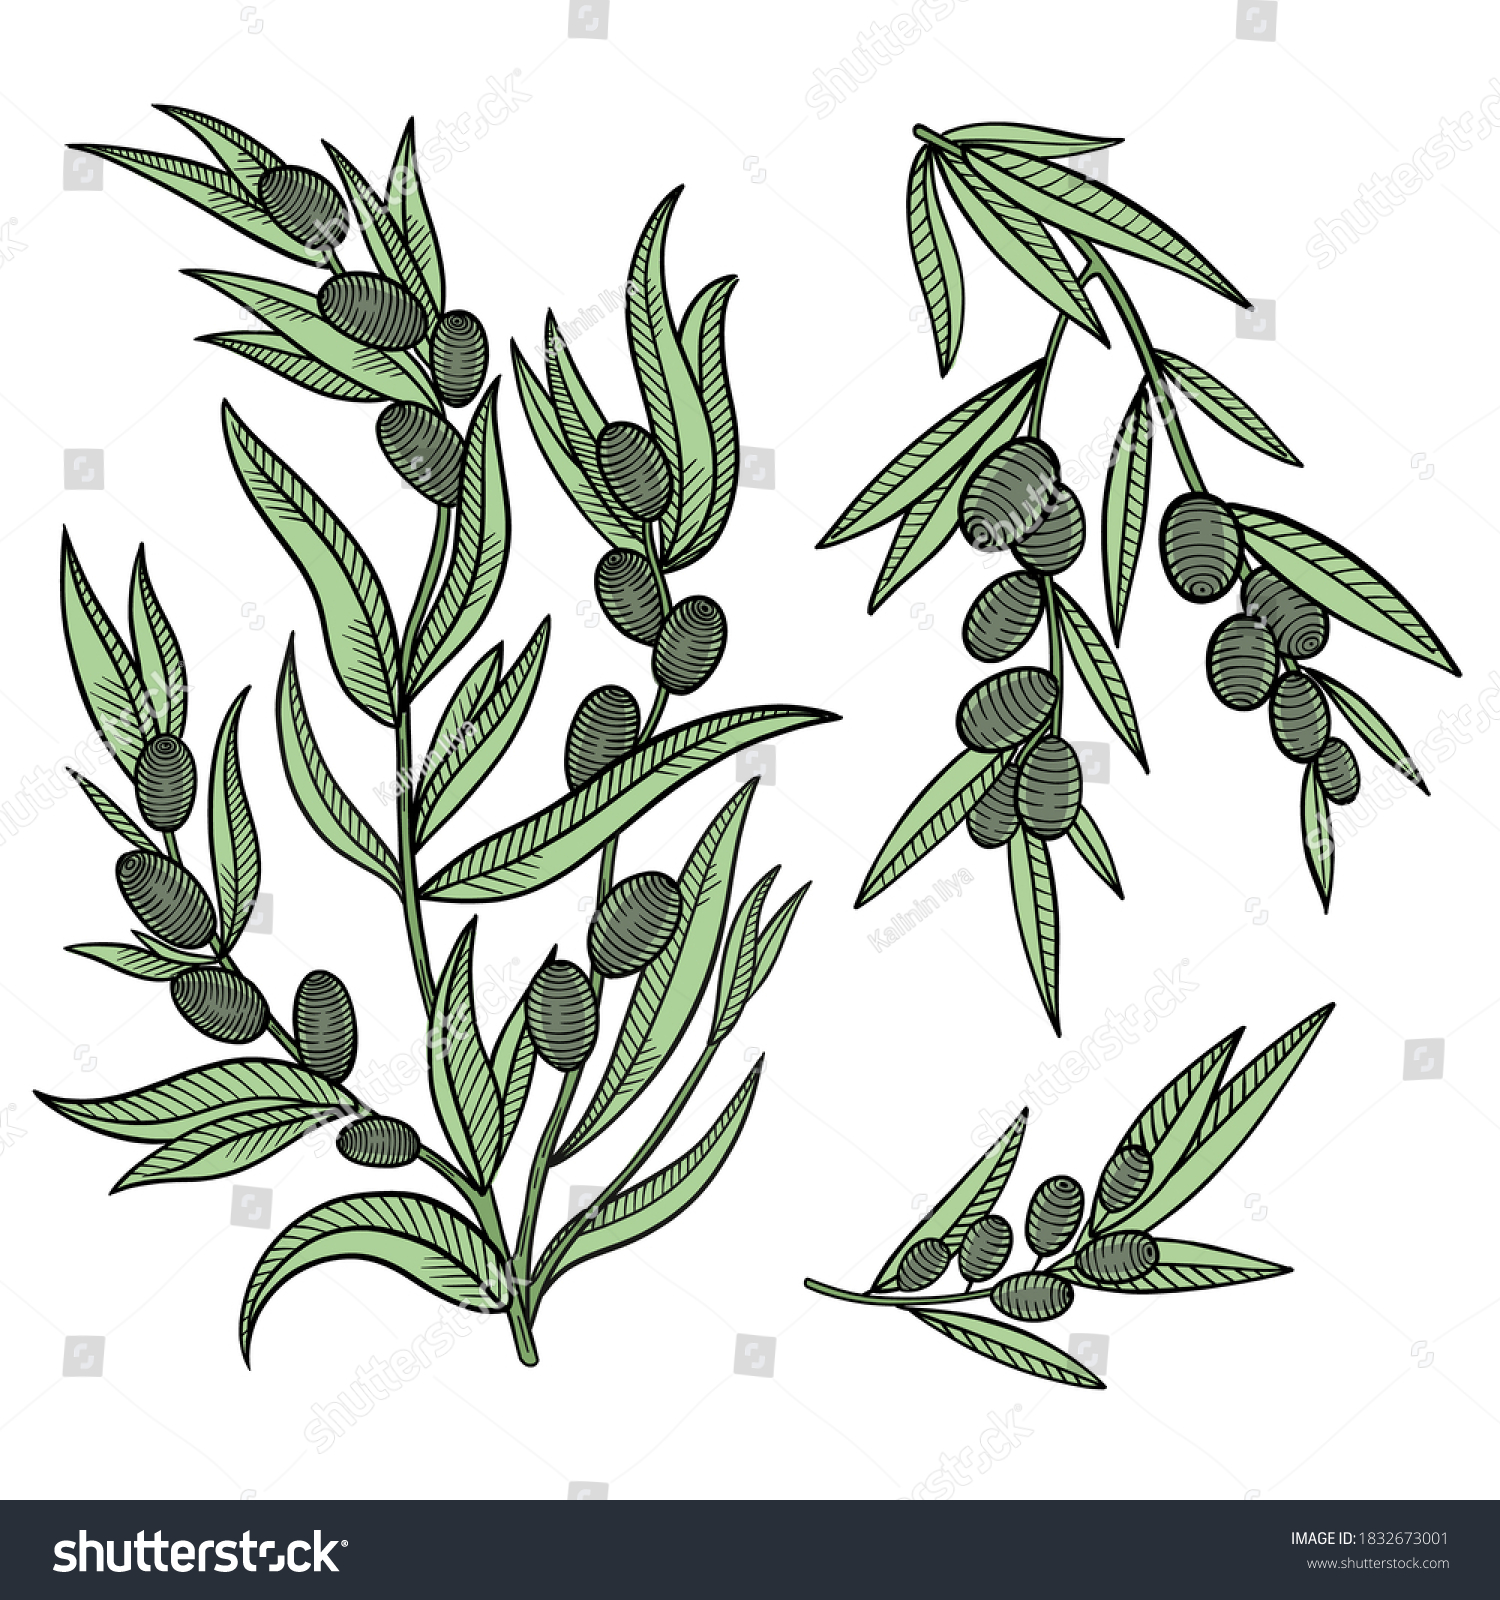 Olive Tree Branches Leaves Fruits Engraved Stock Vector Royalty Free 1832673001 Shutterstock 